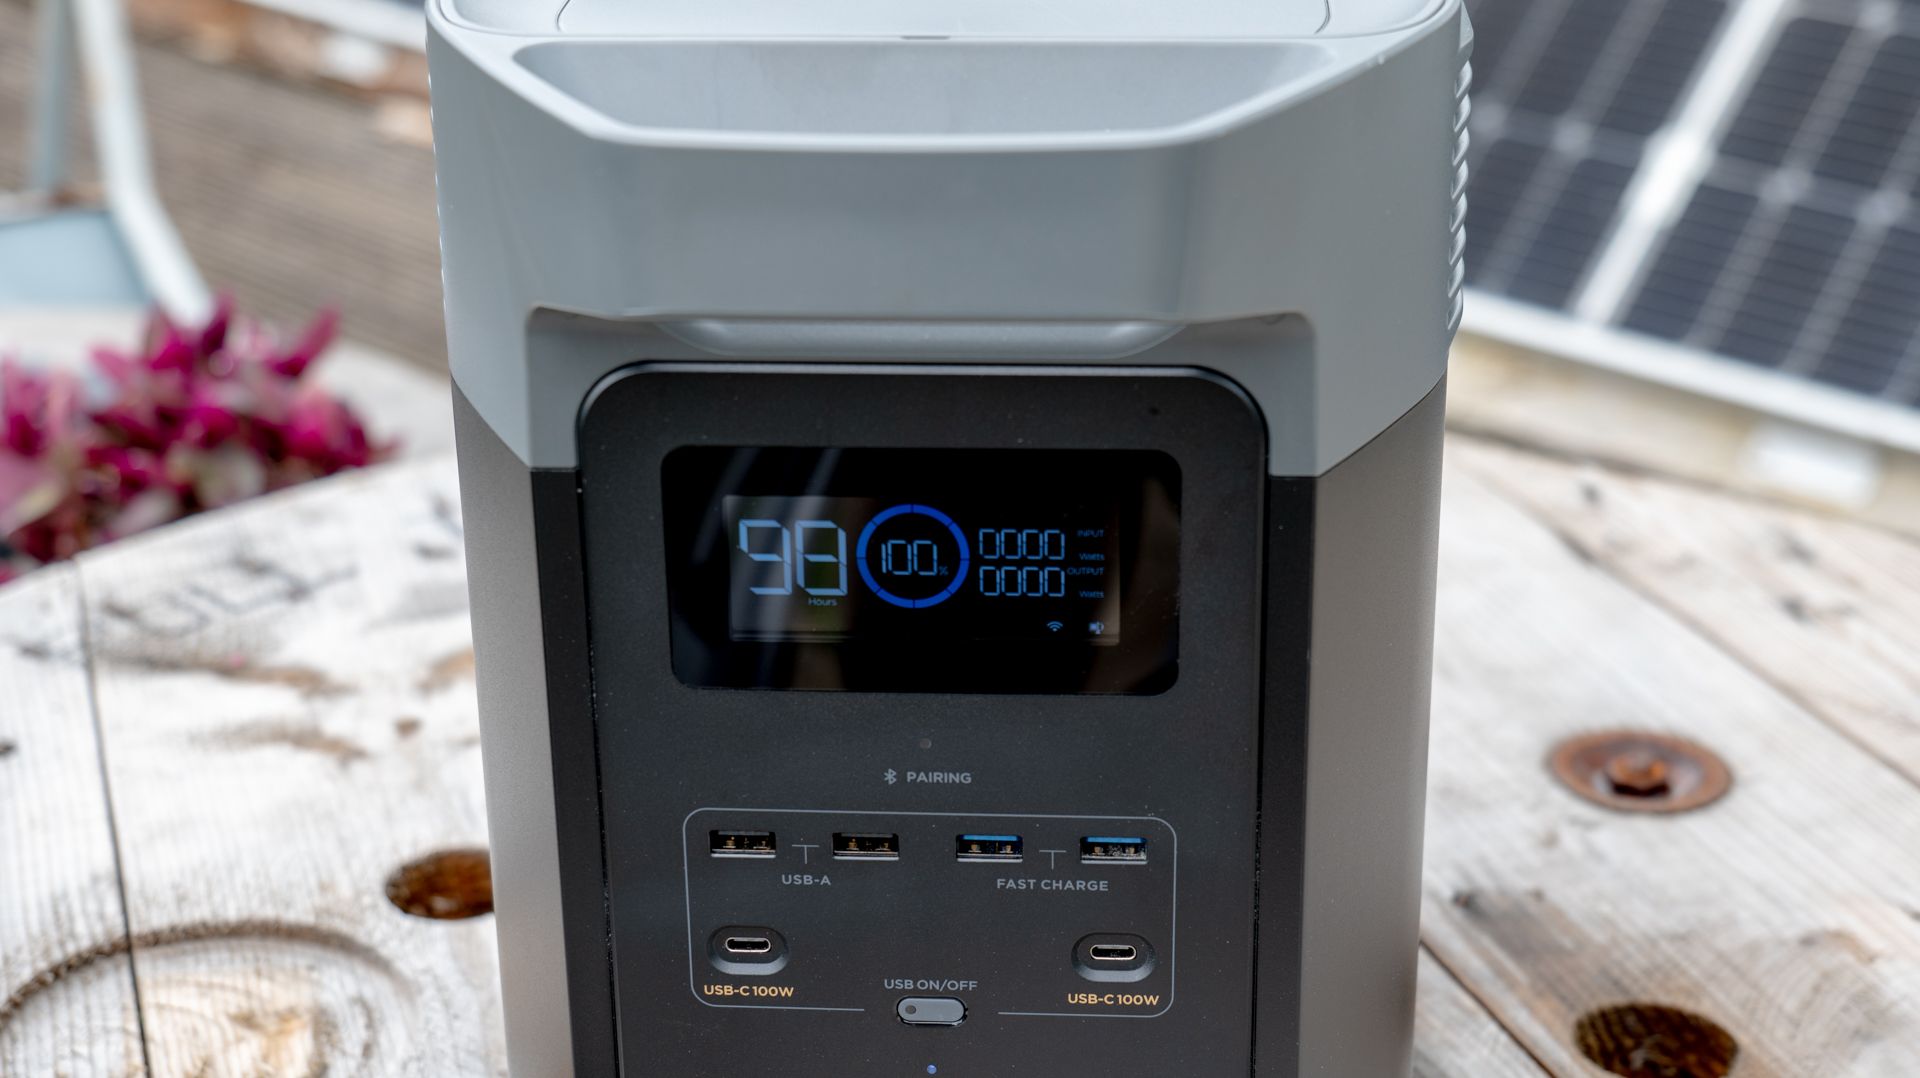 EcoFlow Delta 2 power station review: Power and ports aplenty